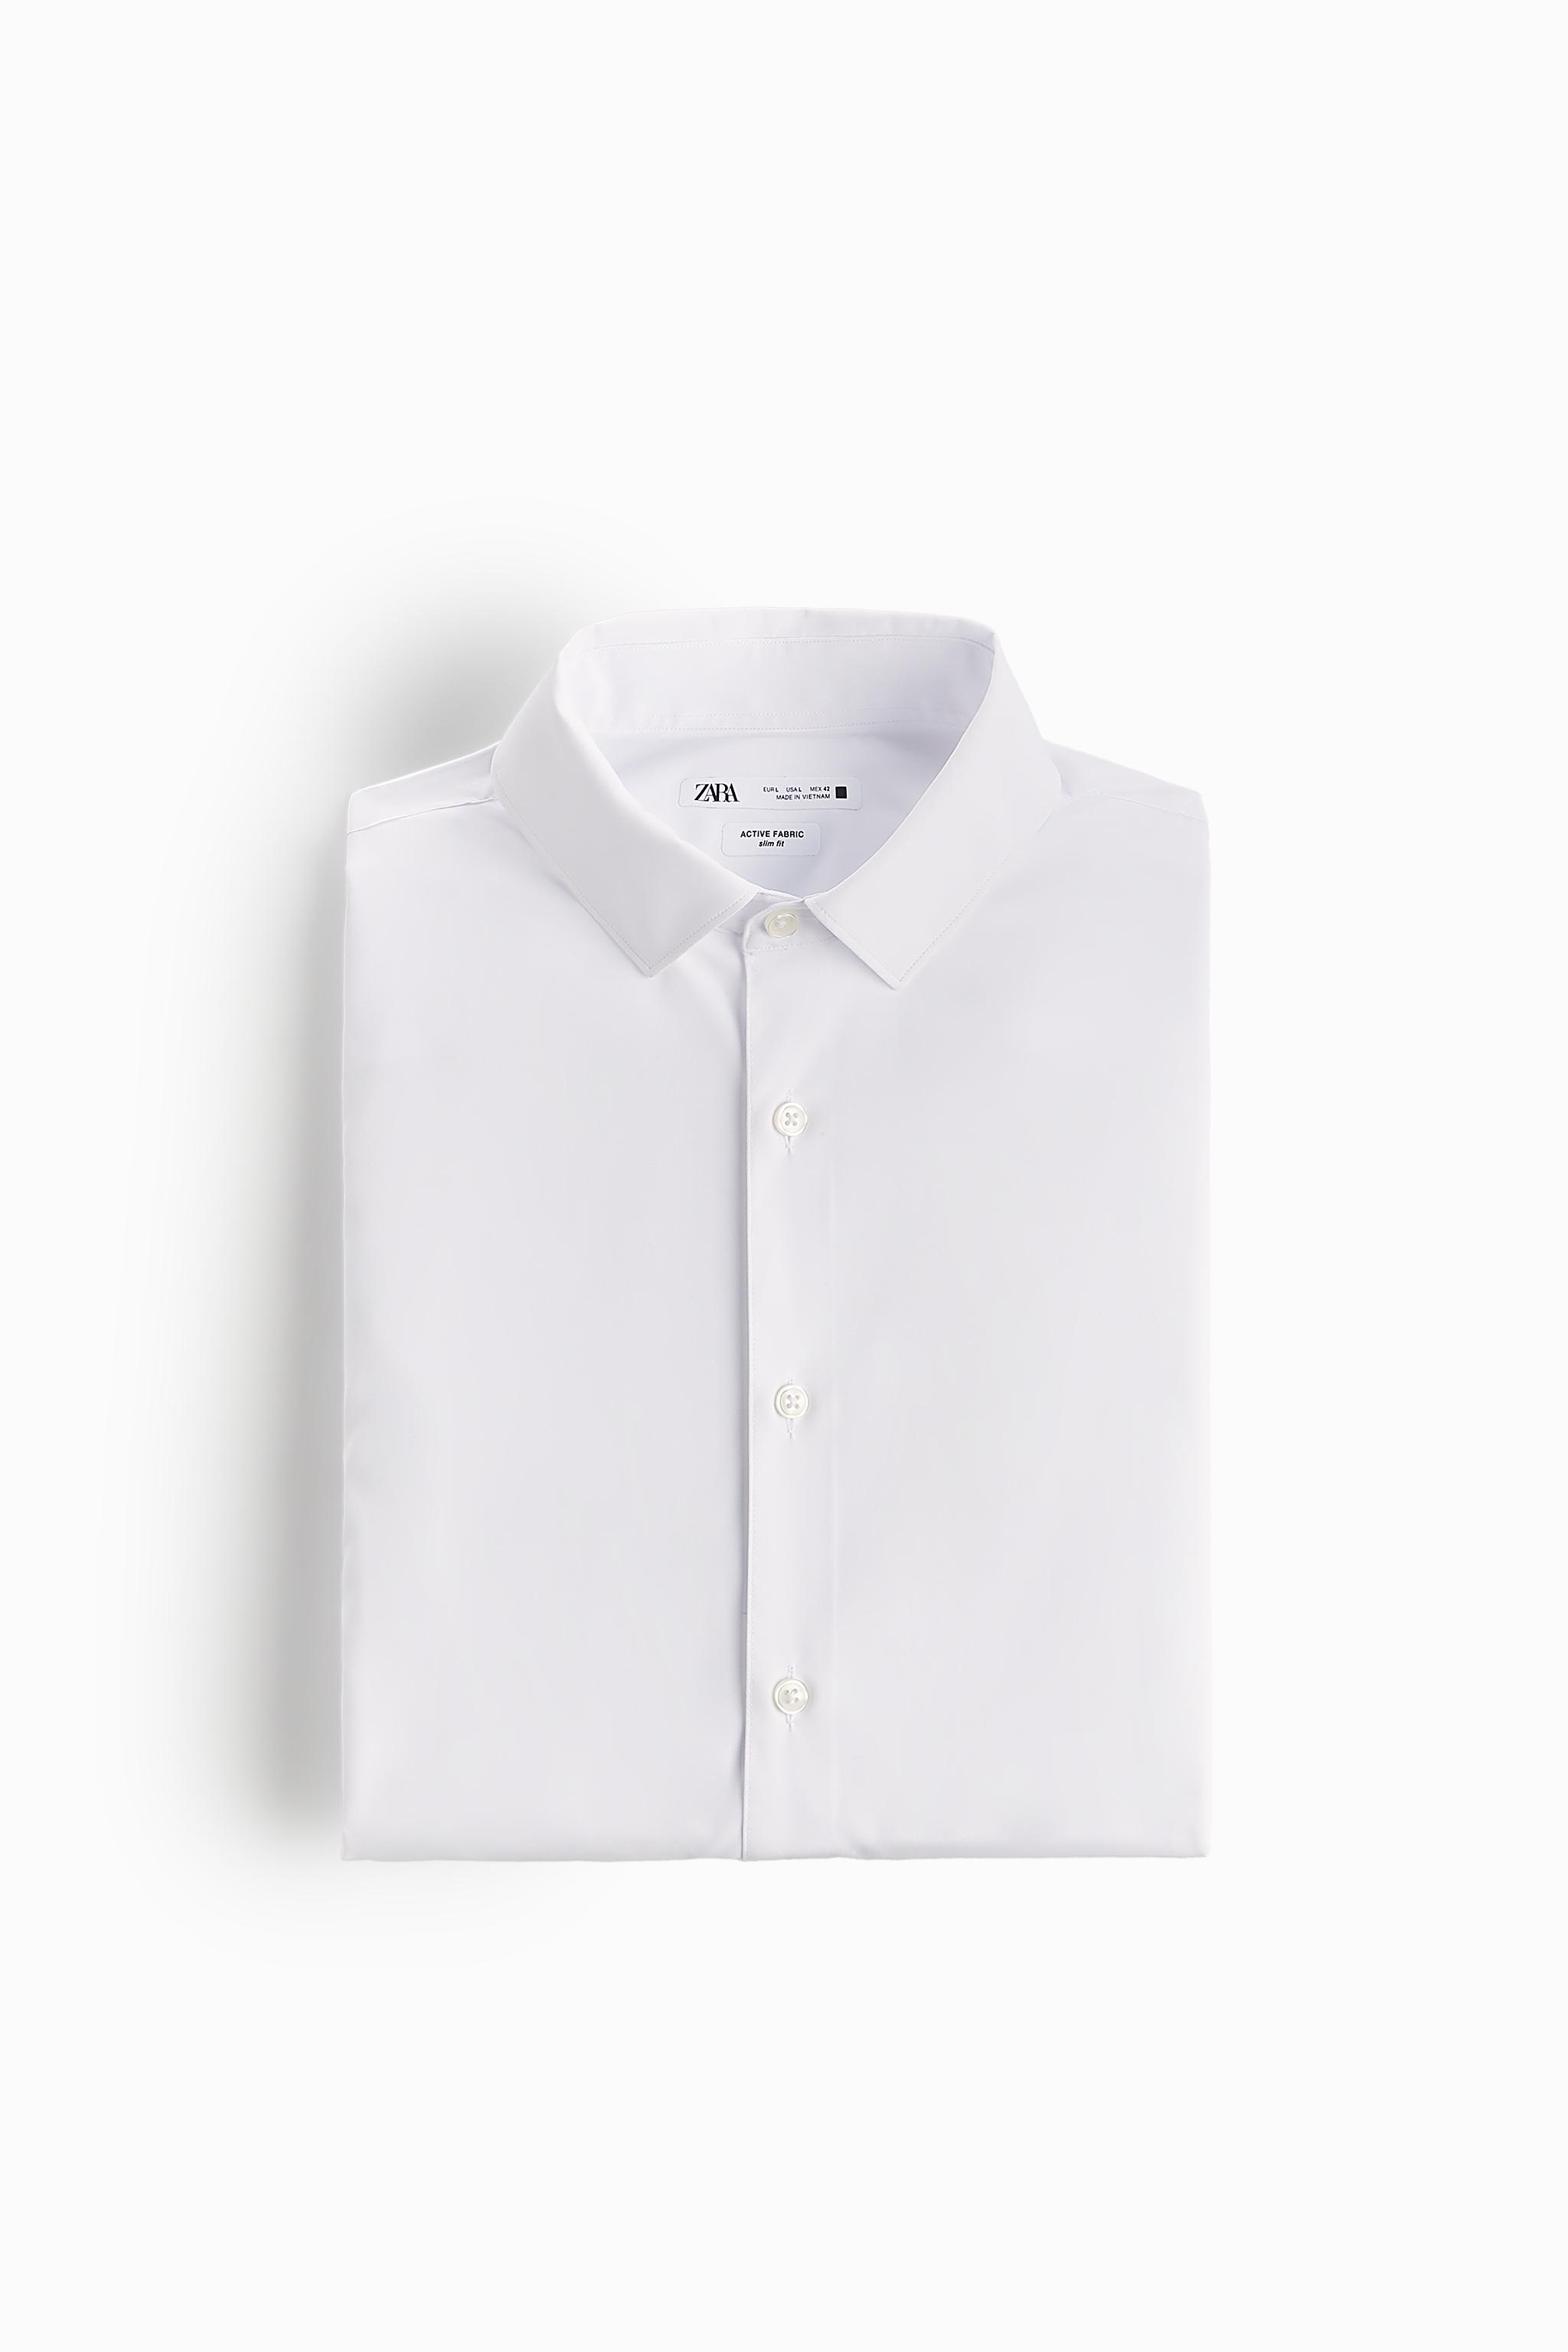 Zara L Men's Shirts Price Starting From Rs 2,512. Find Verified